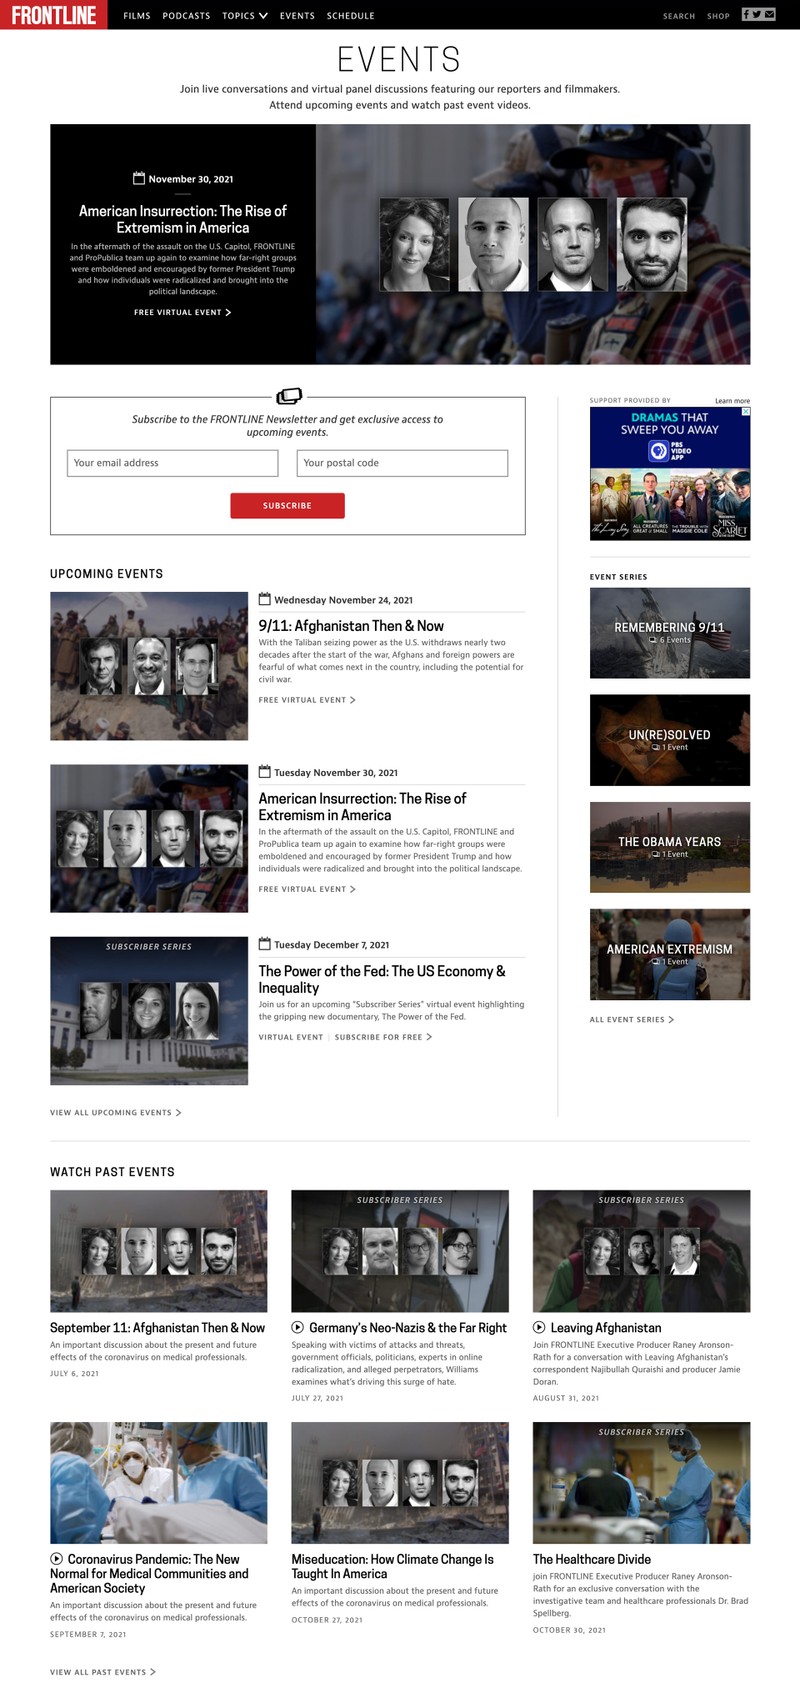 The FRONTLINE events section page design.